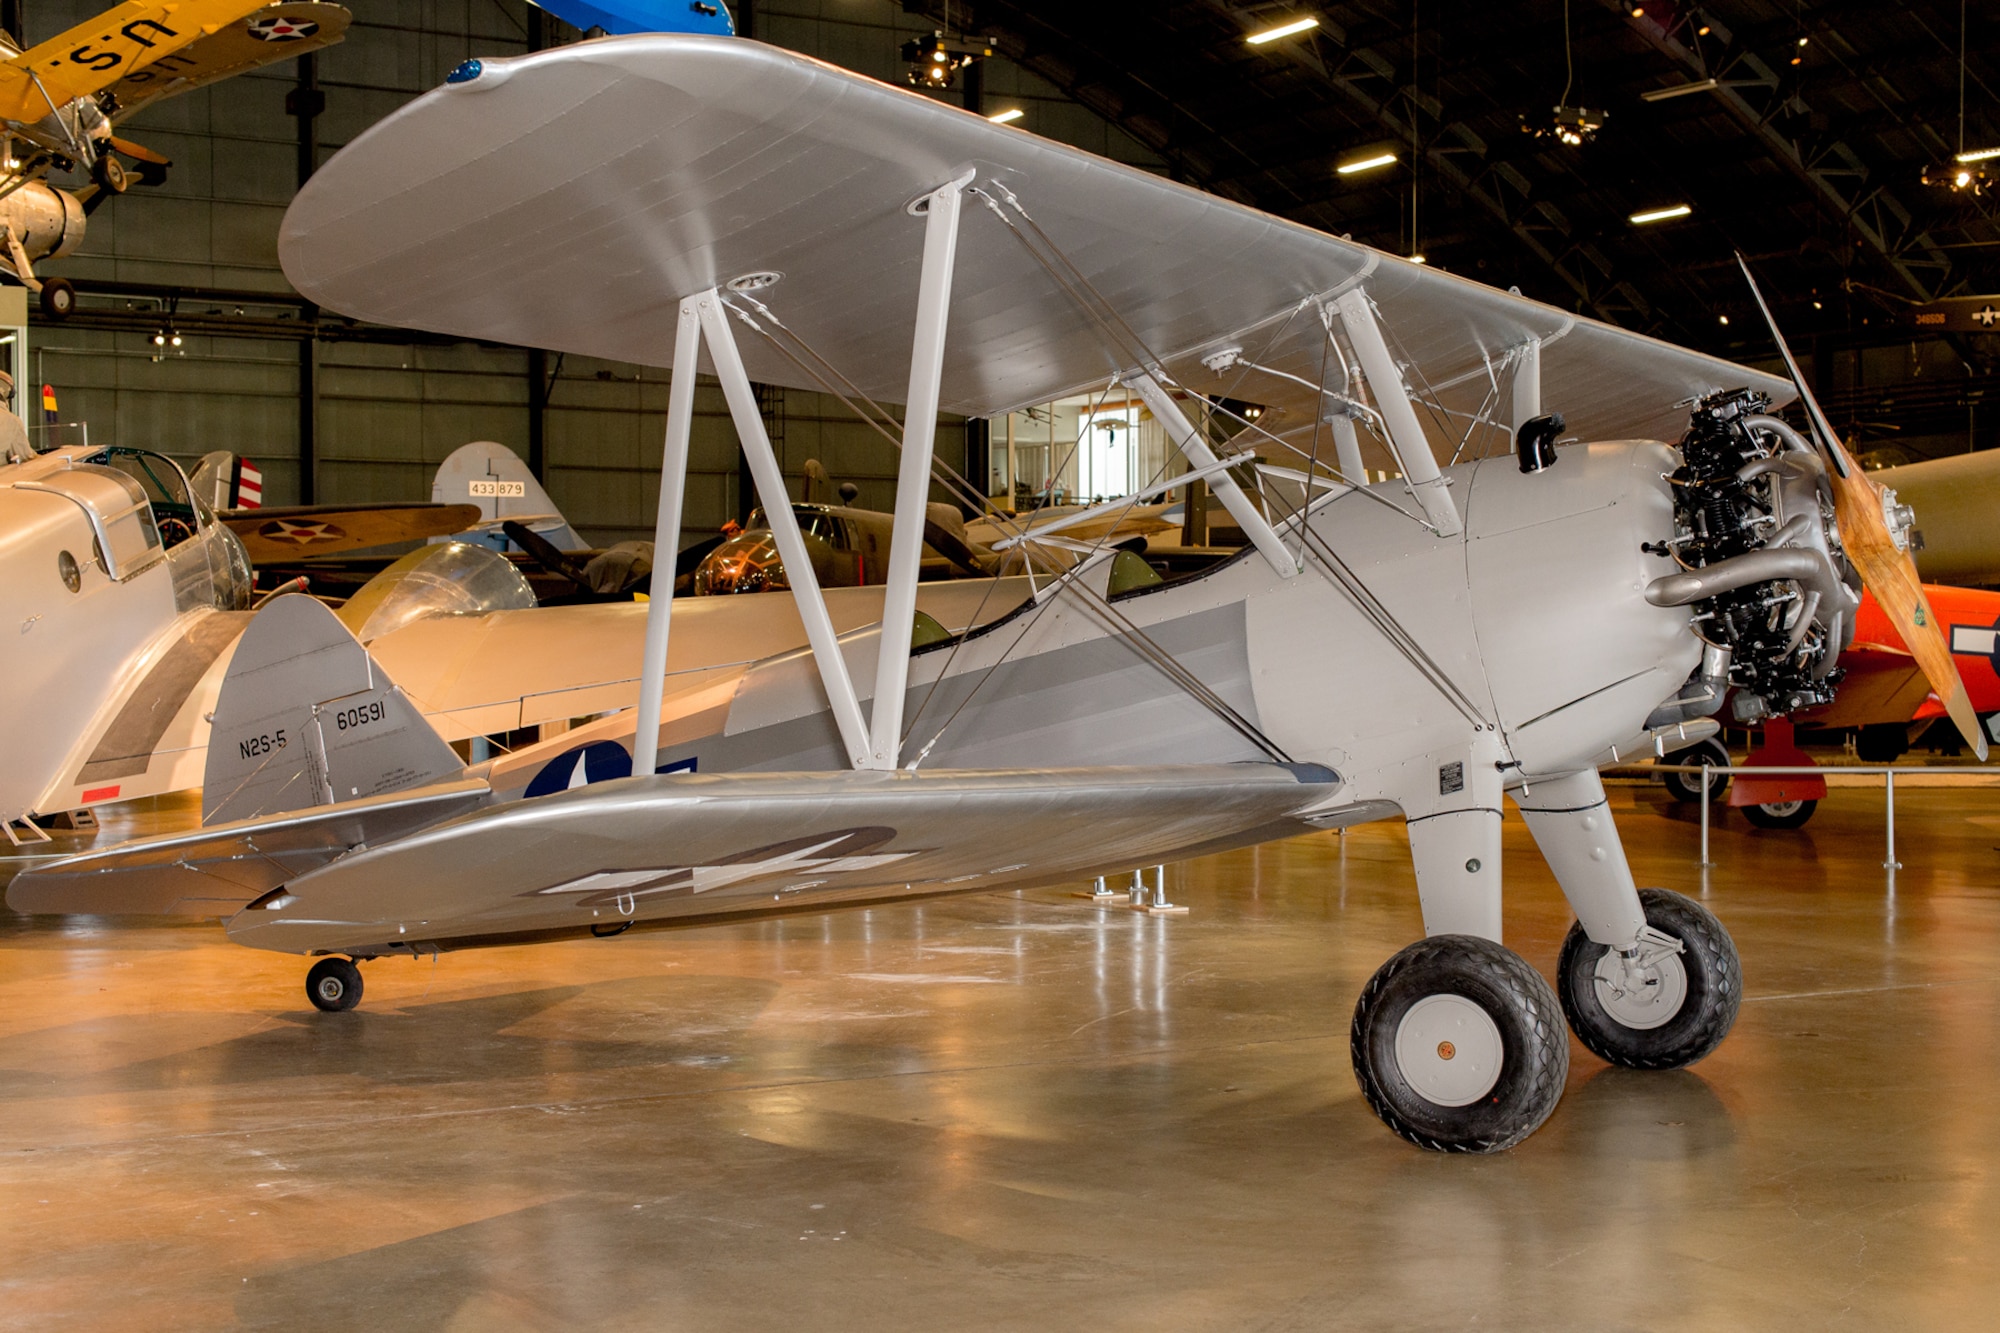 DAYTON, Ohio -- Stearman PT-13D Kaydet in the World War II Gallery at the National Museum of the United States Air Force. (U.S. Air Force photo by Jim Copes)
